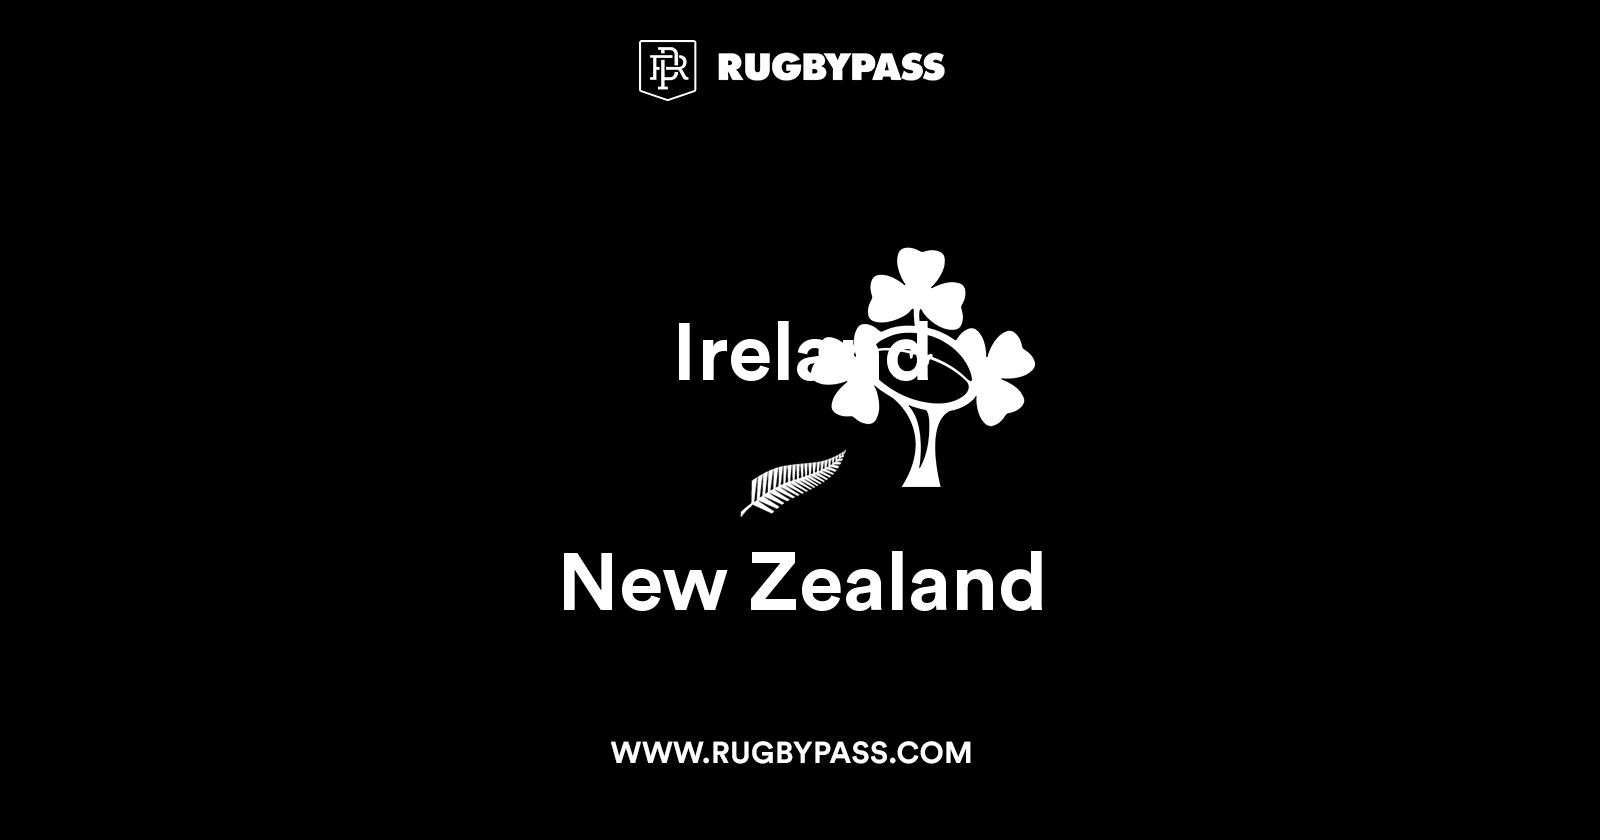 Ireland vs New Zealand | Live & Latest Rugby Union Scores & Results | RugbyPass